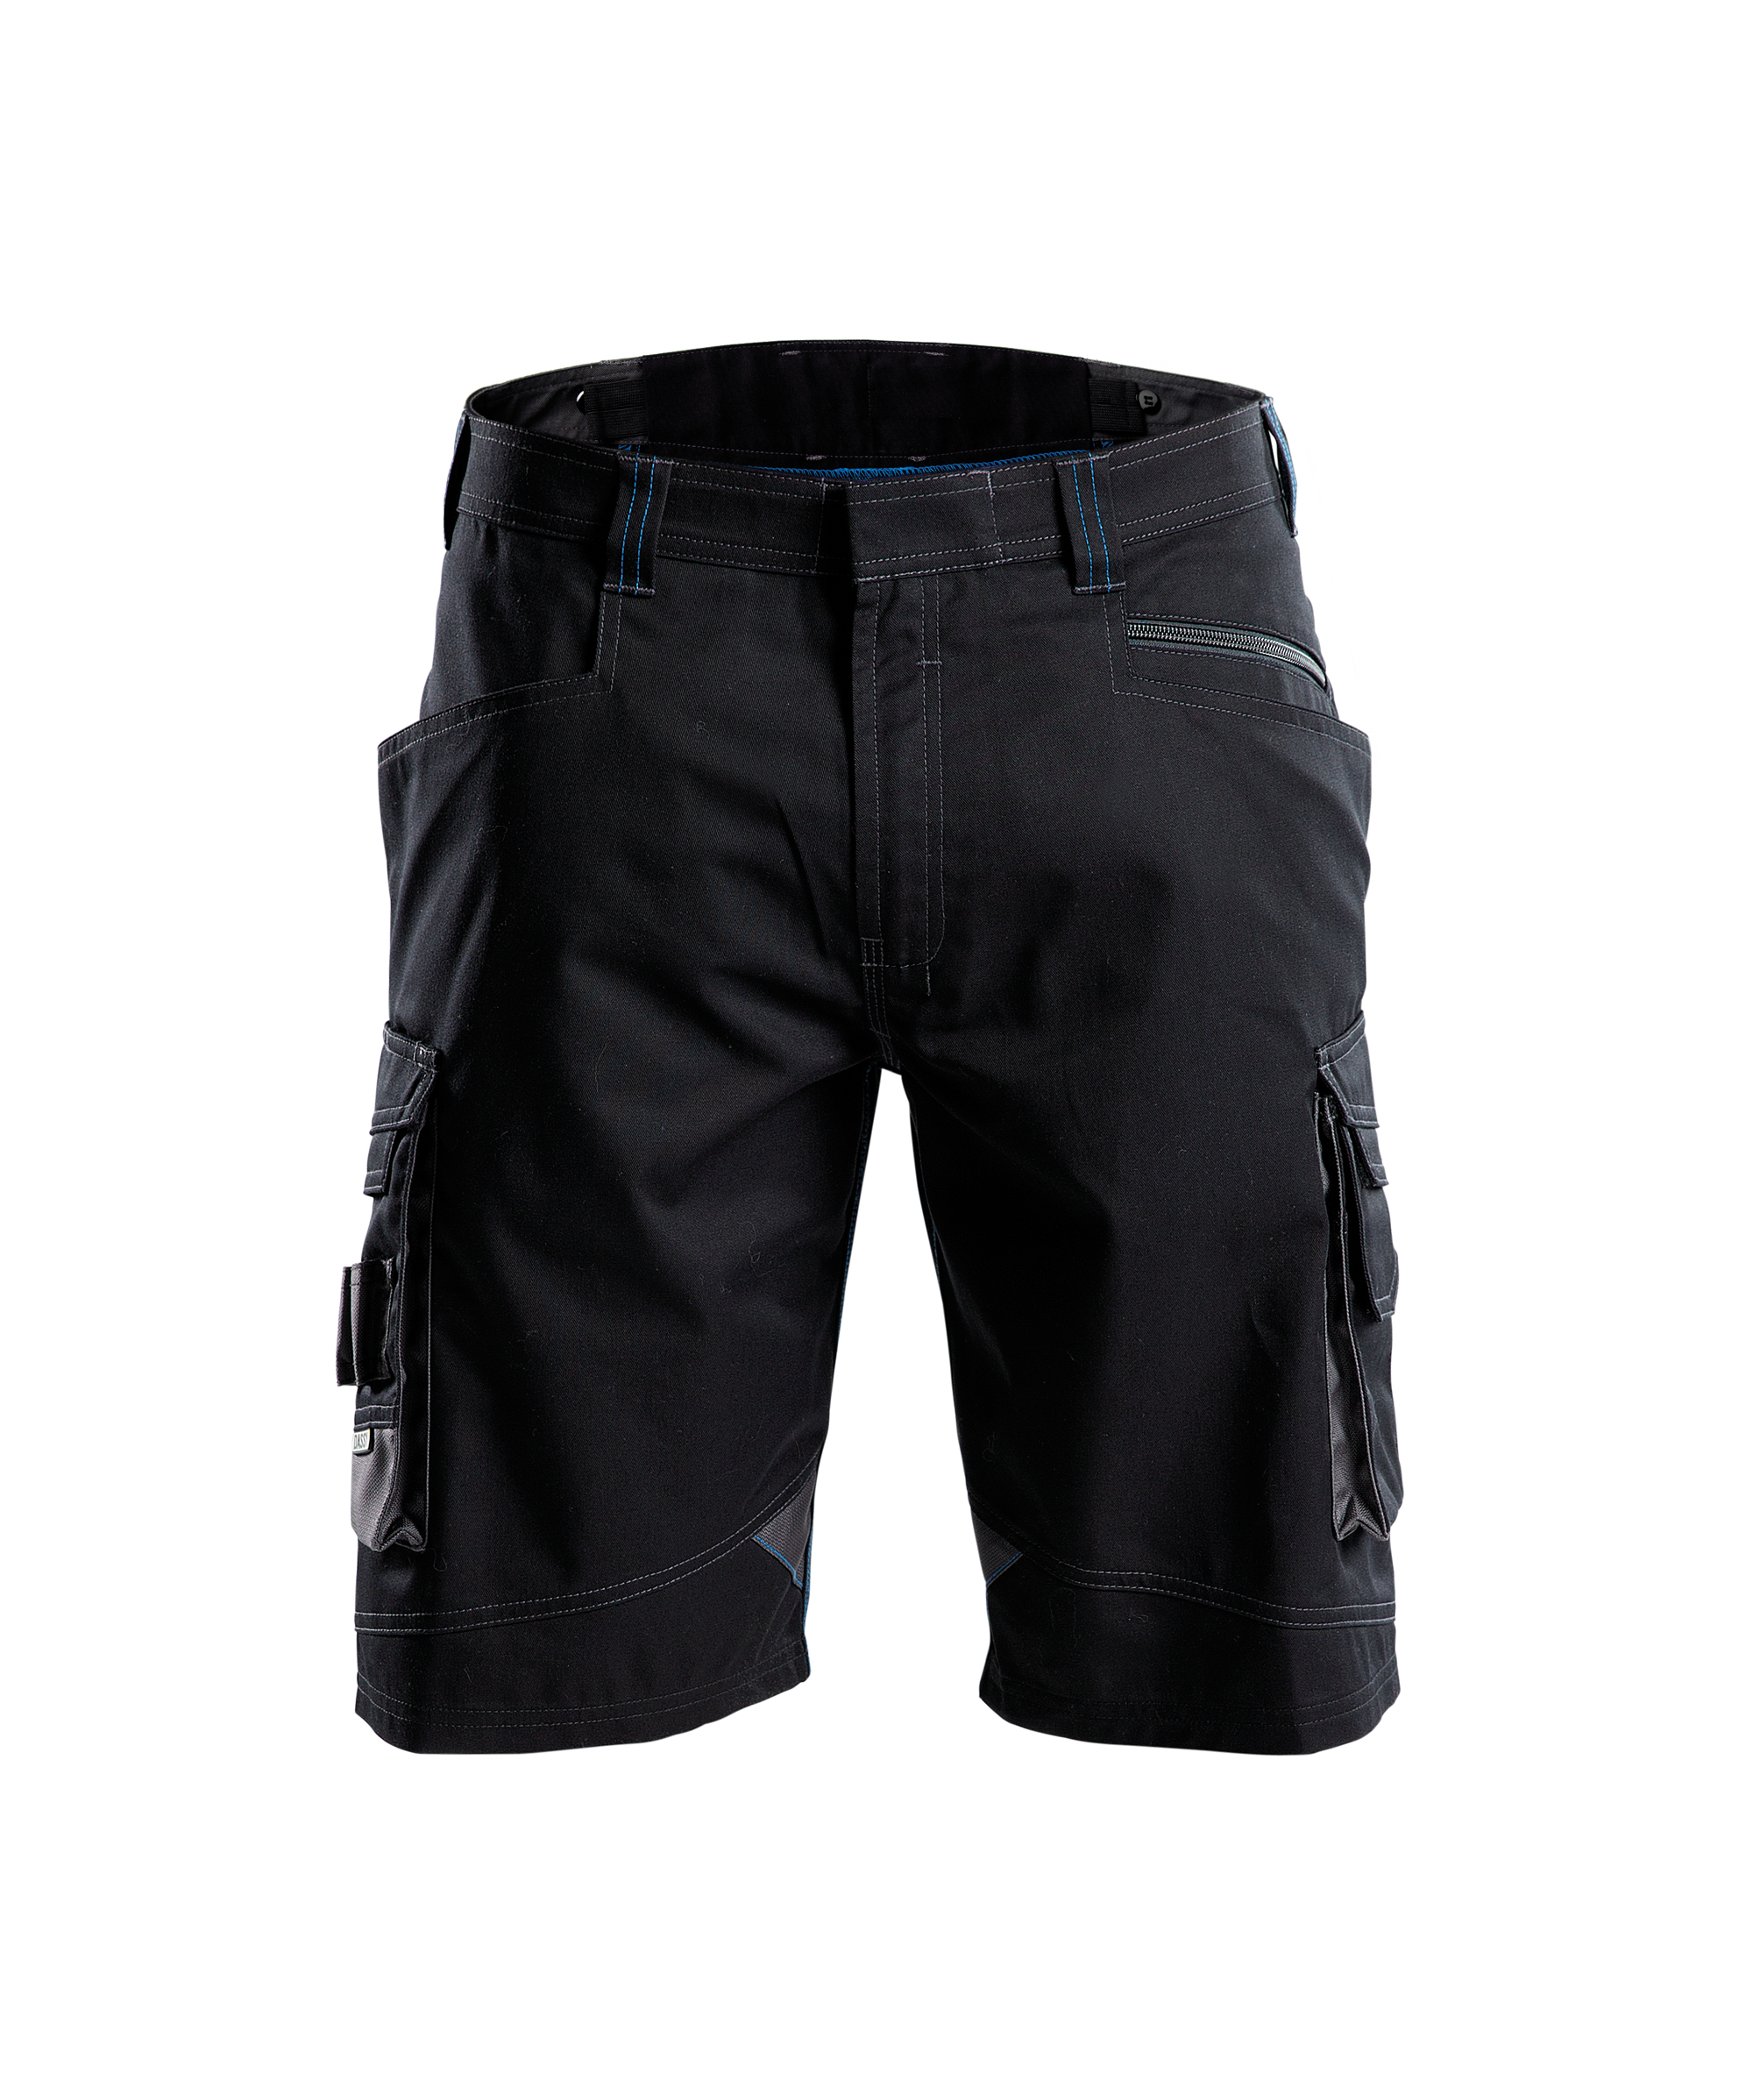 cosmic_two-tone-work-shorts_black-anthracite-grey_front.jpg